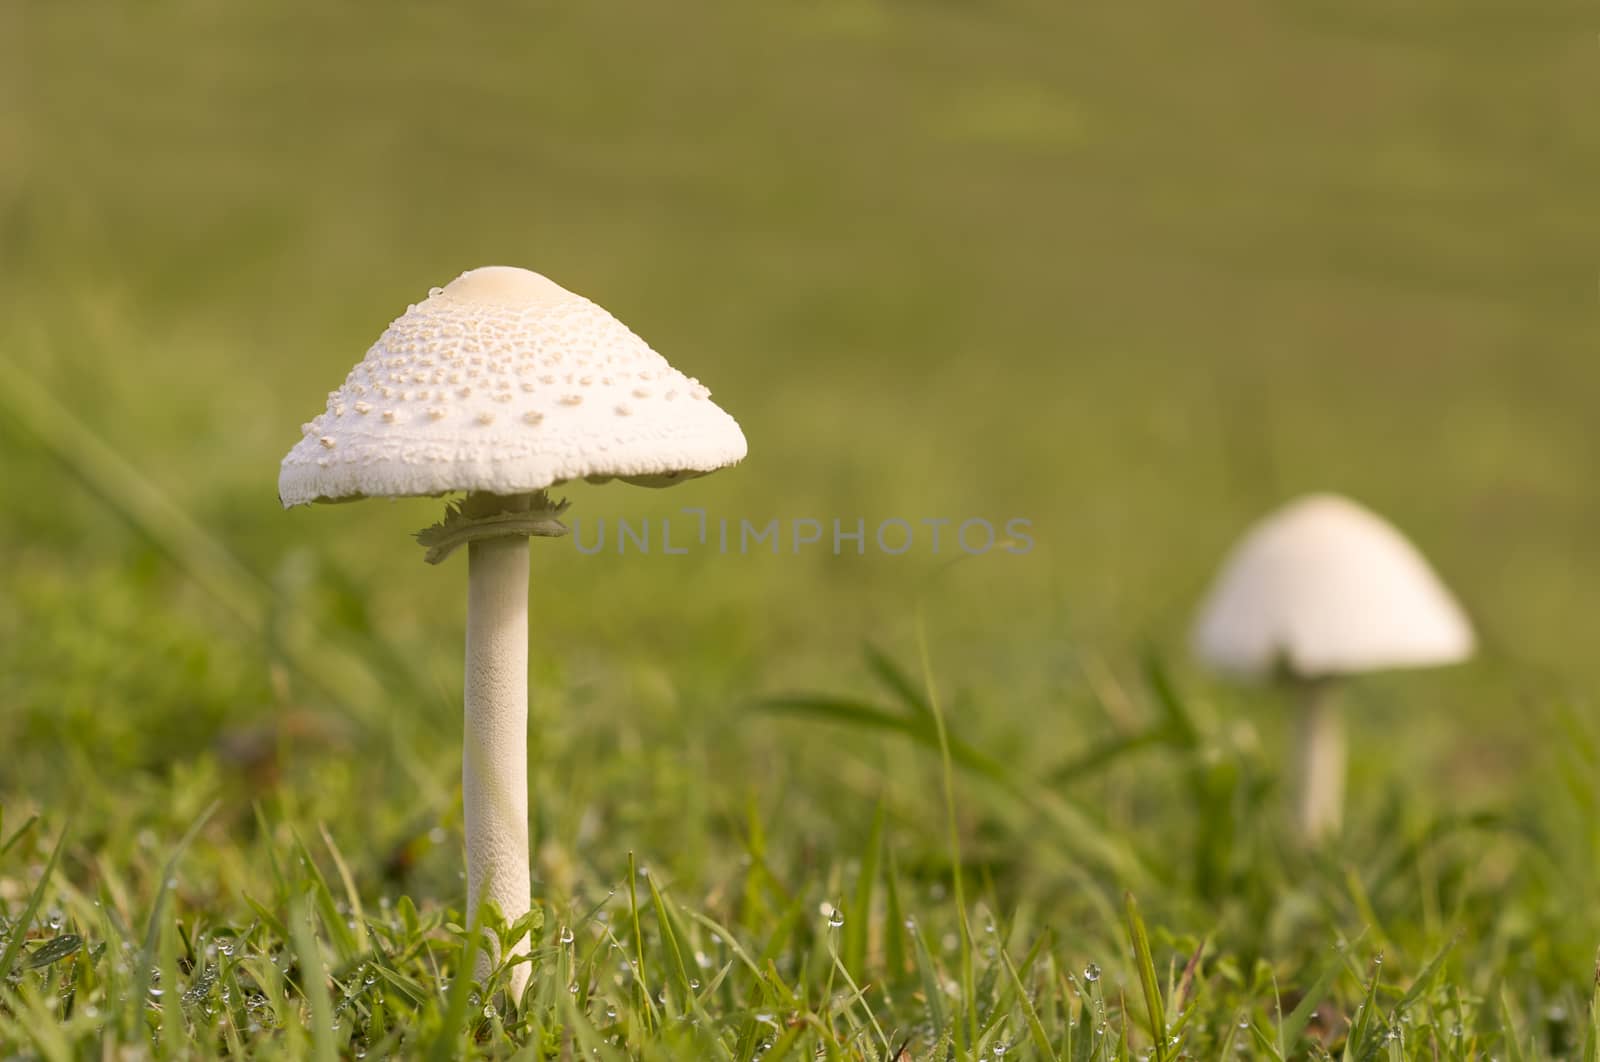 tall young mushroom after rain growing in wet green grassy field